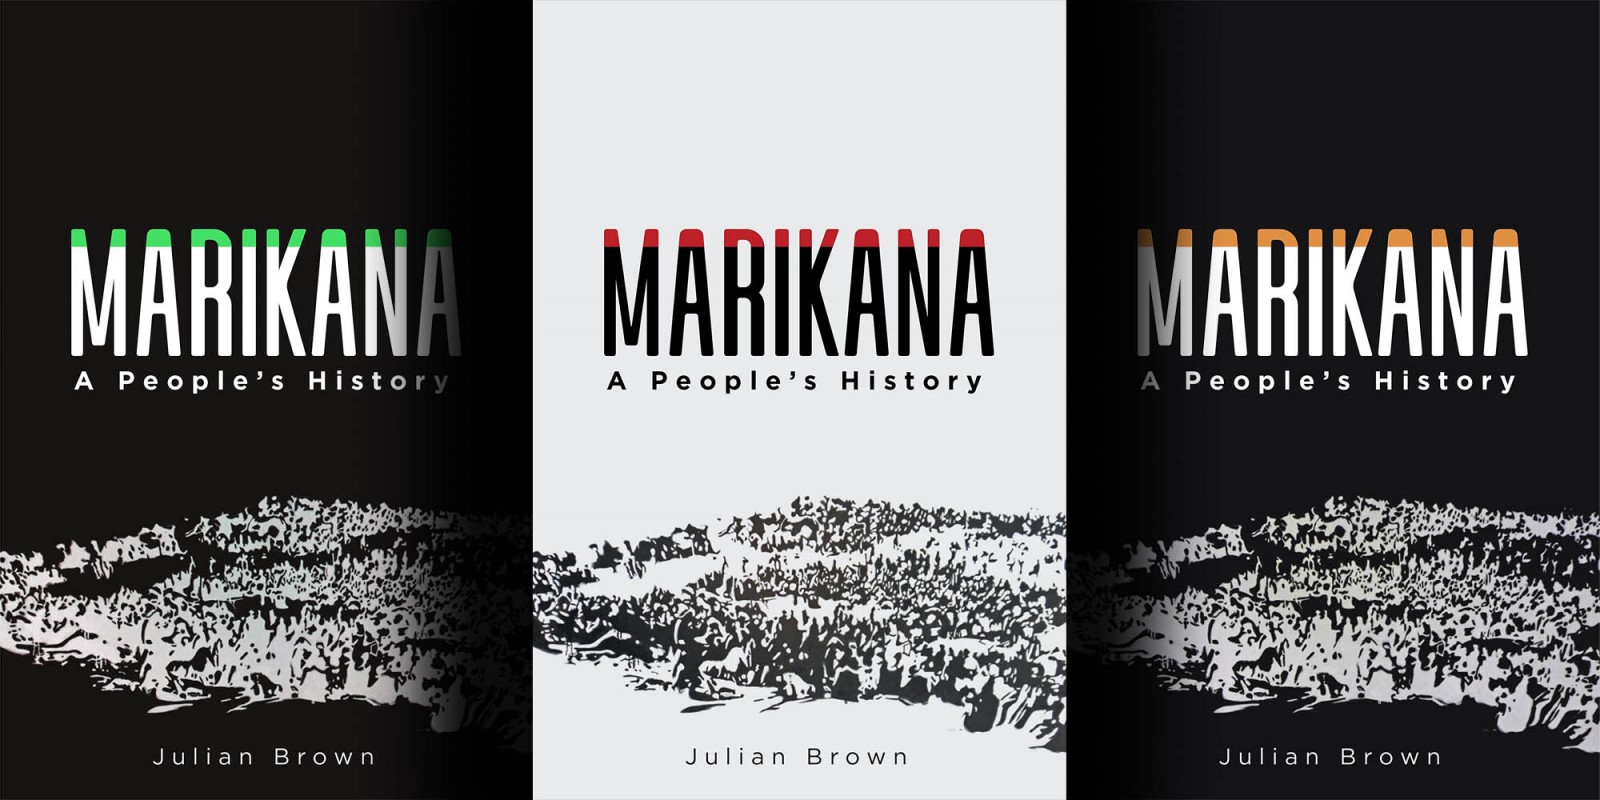 Academic’s In-depth Account of Marikana Massacre Marred by Curious Omissions